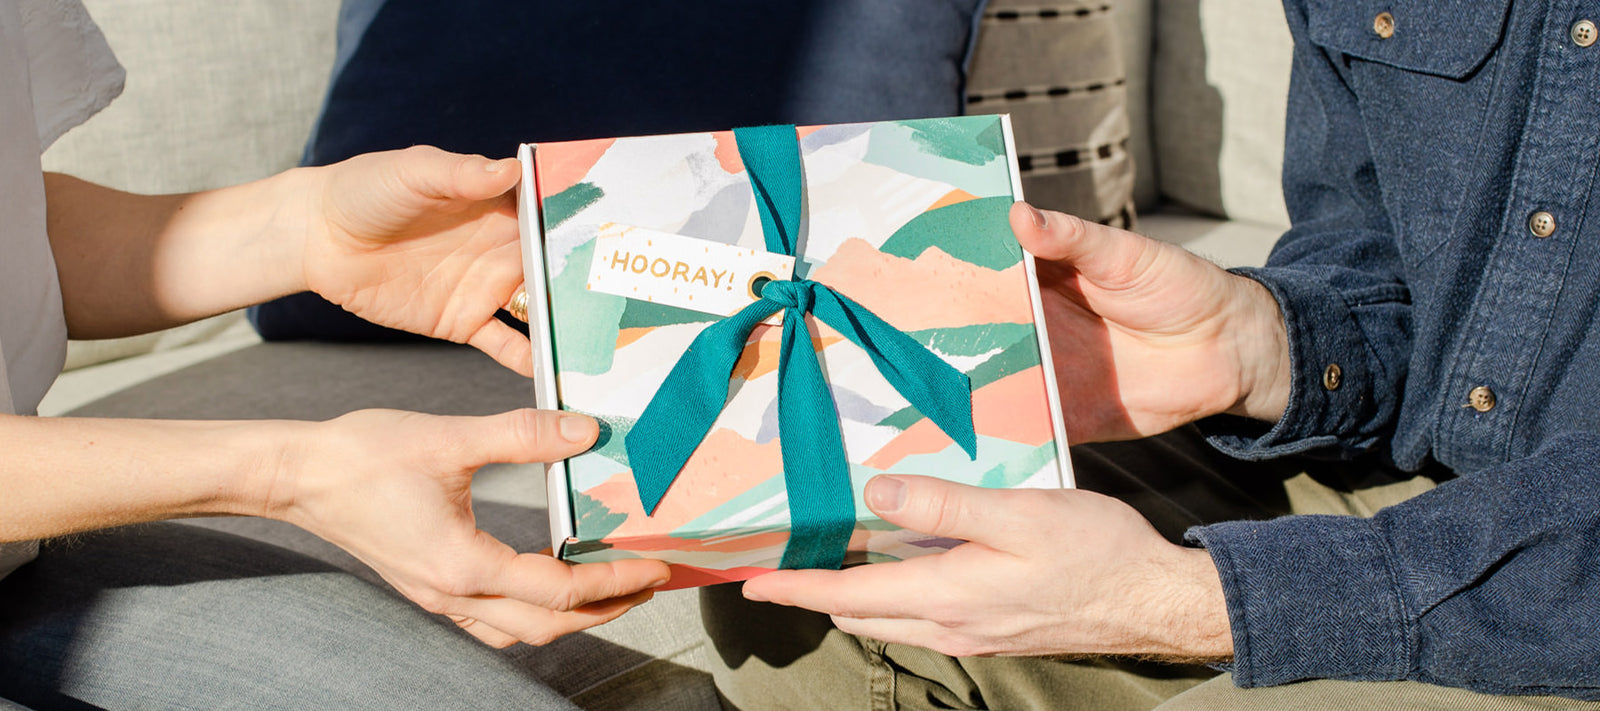 All The Gift Exchange Names That Truly Capture The Spirit Of The Holidays